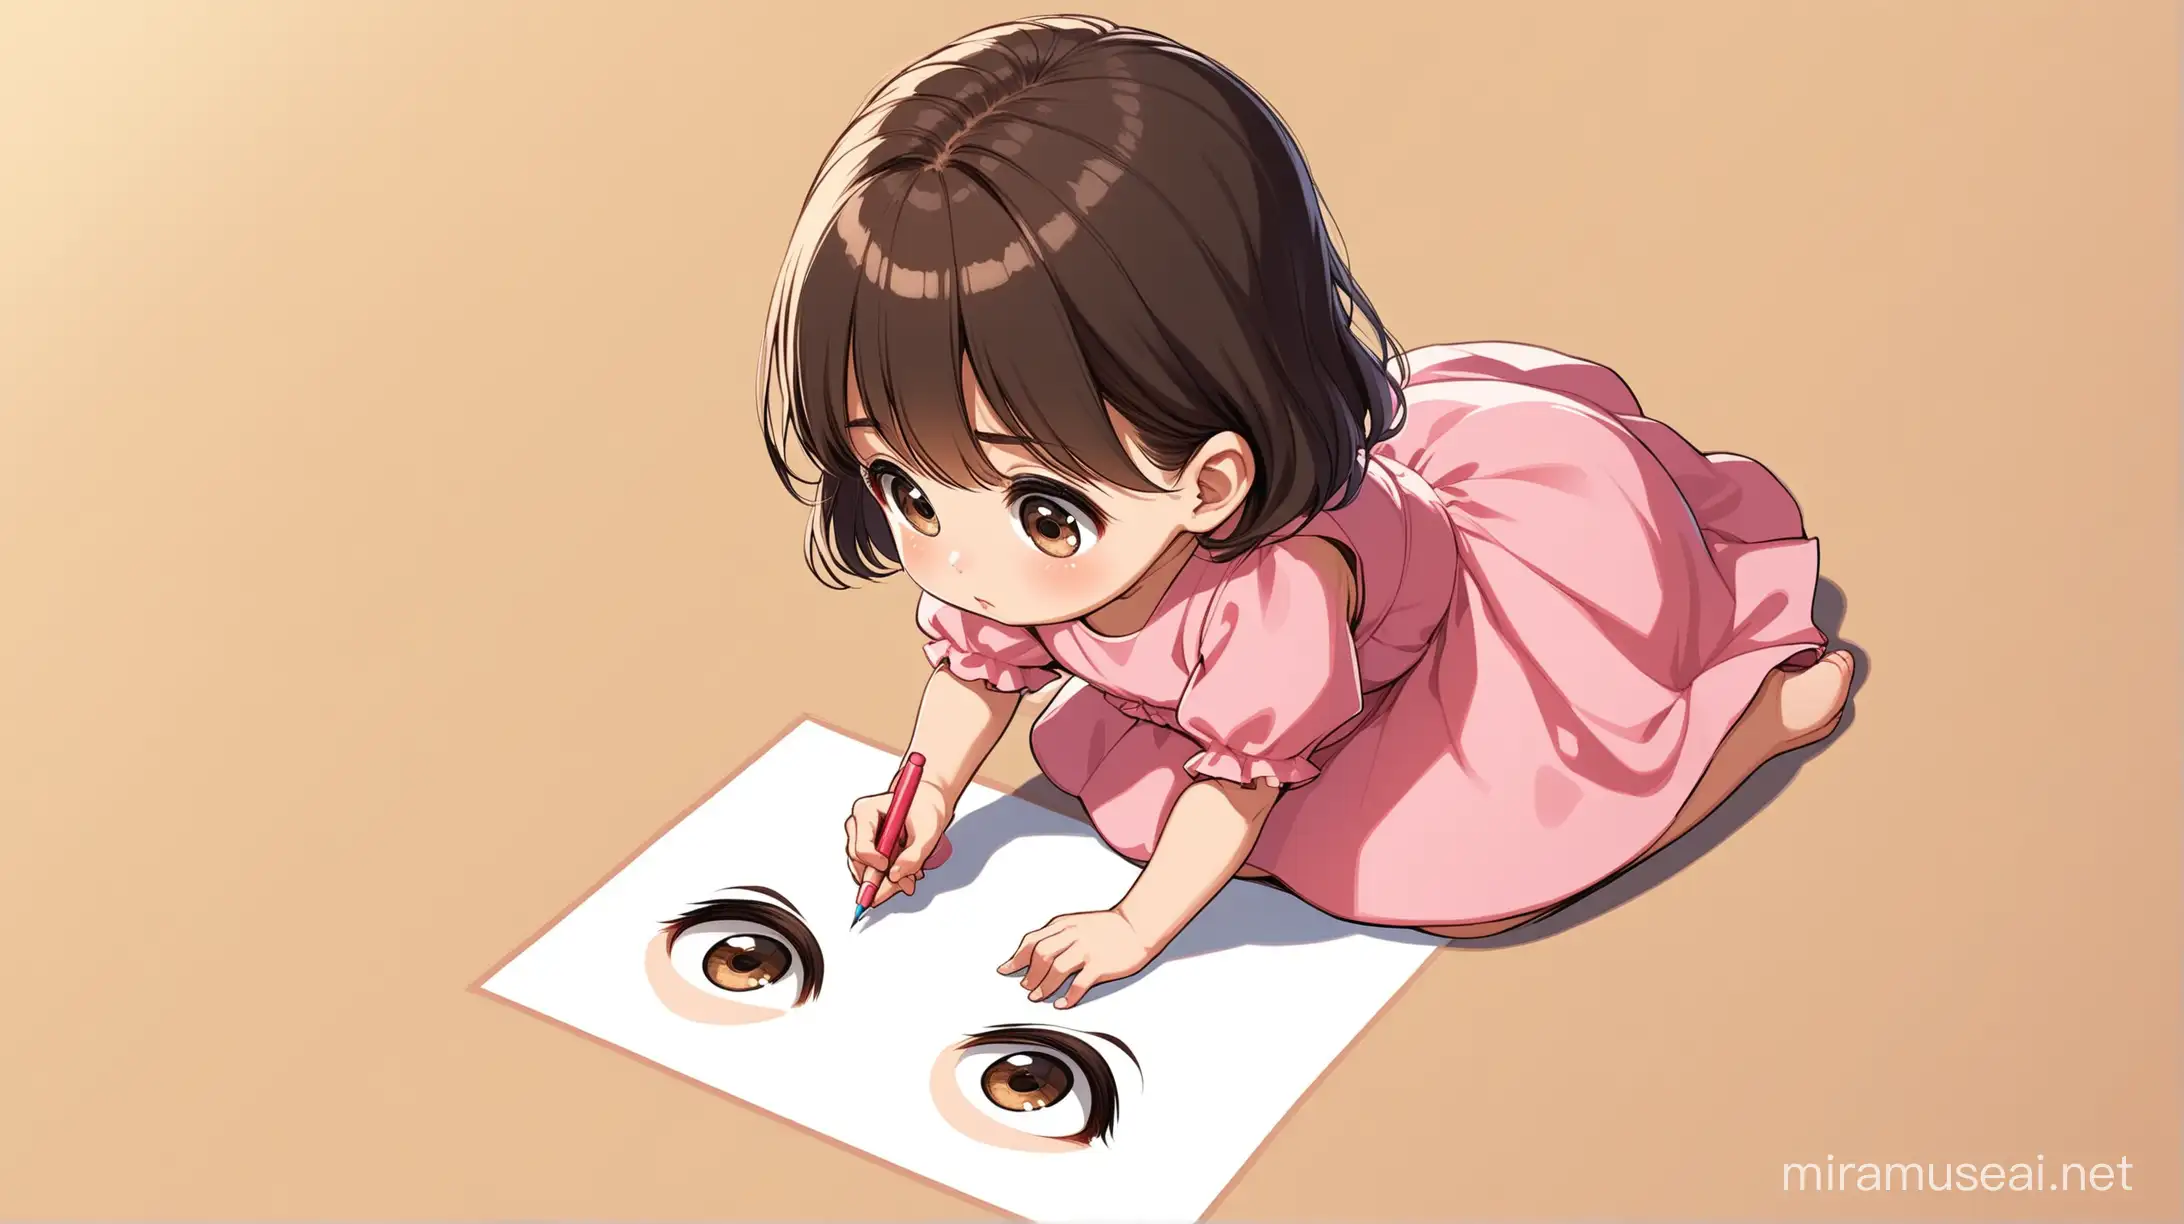 Little Girl Drawing on the Floor in a Pink Dress